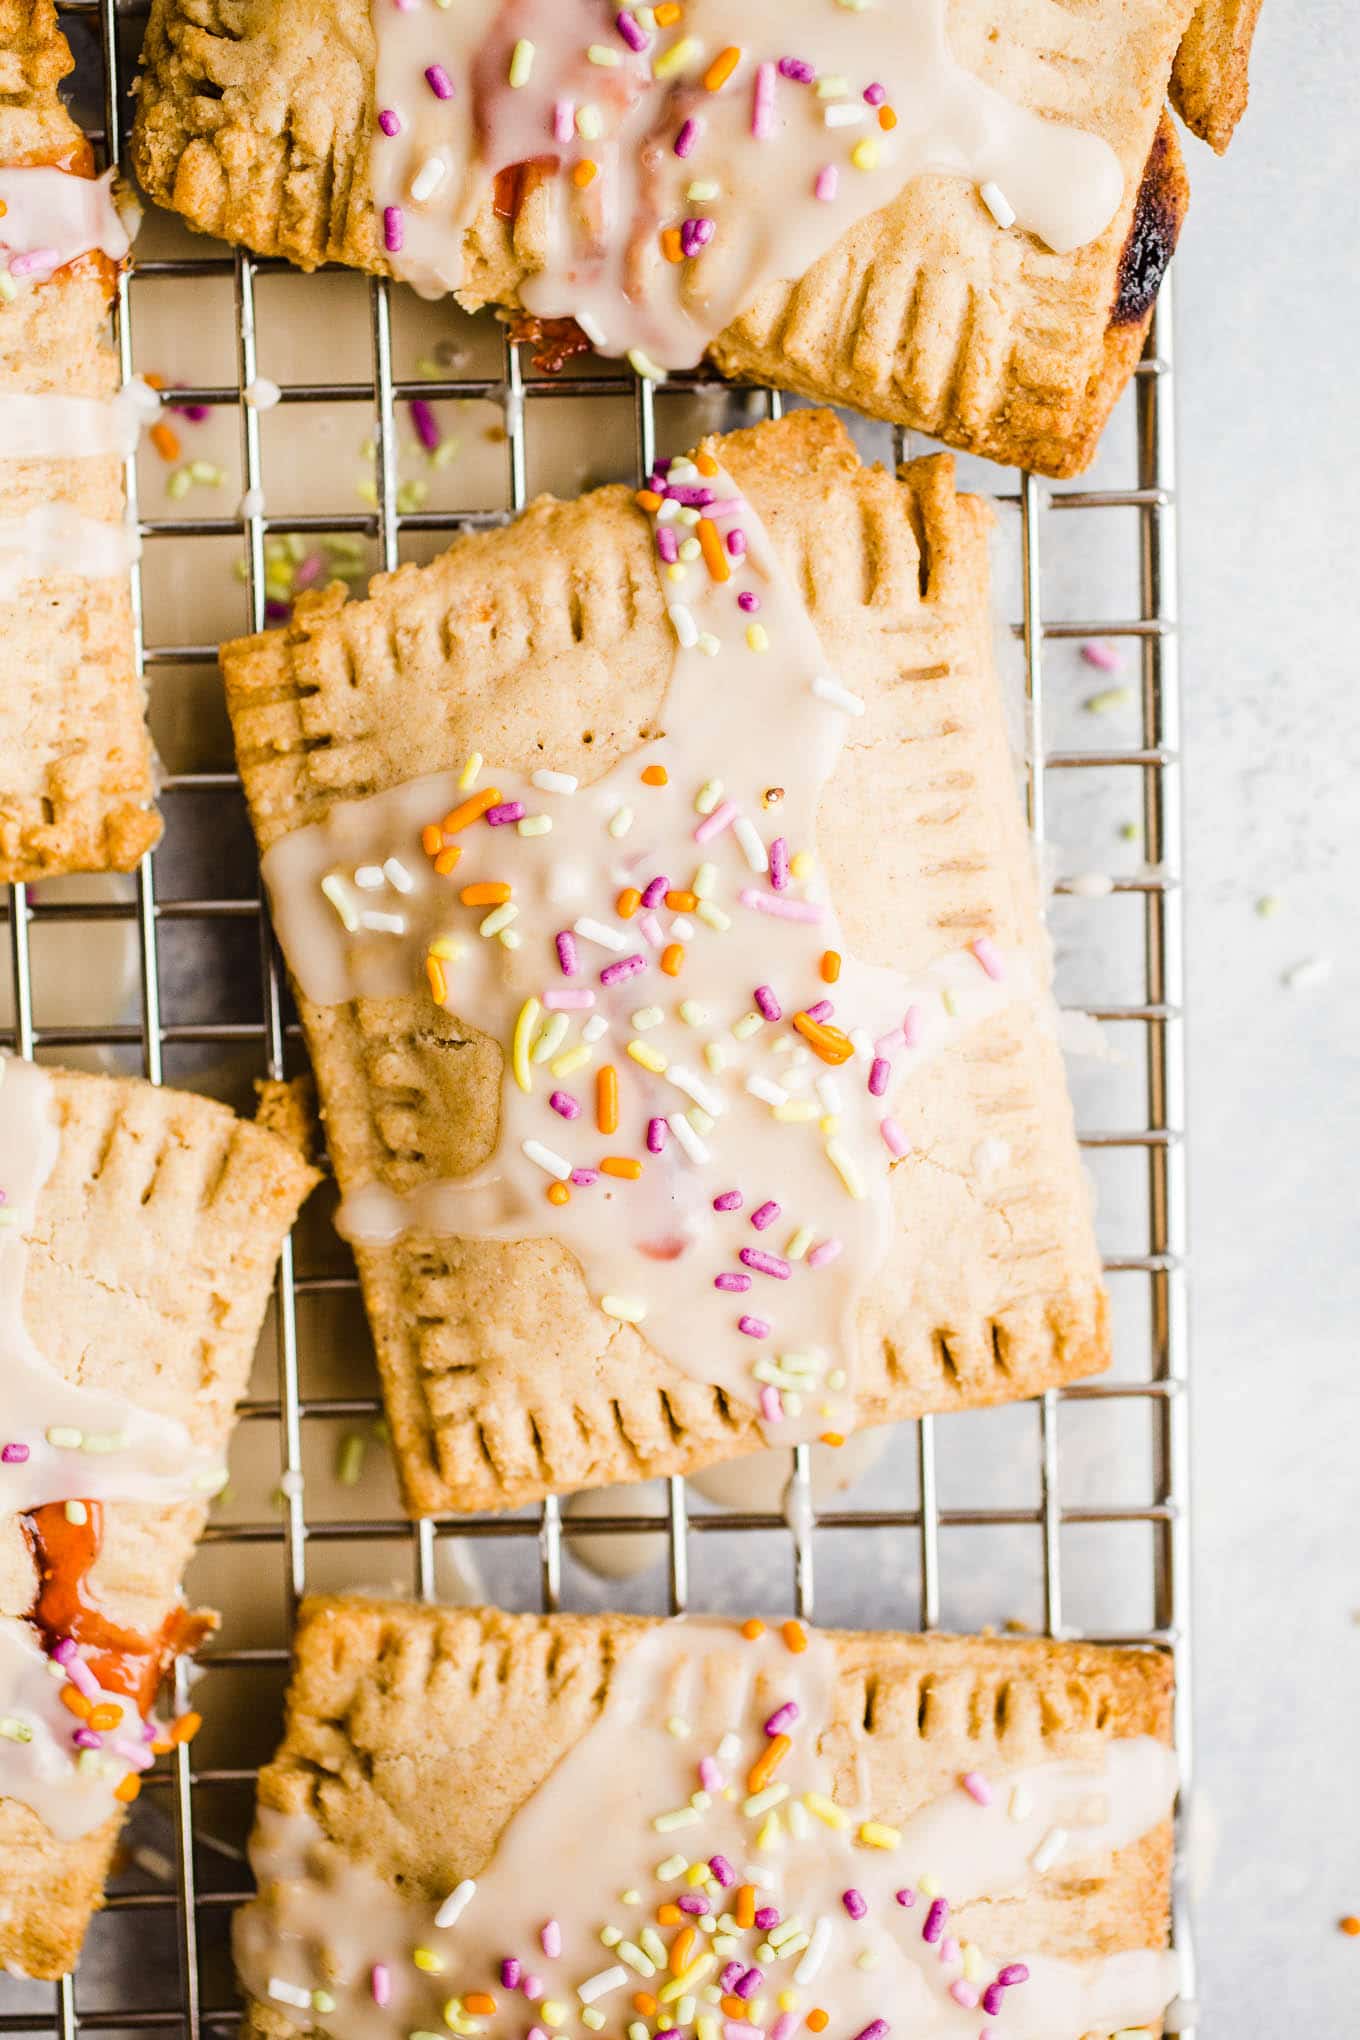 Glazed toaster pastries with sprinkles on a wire rack.